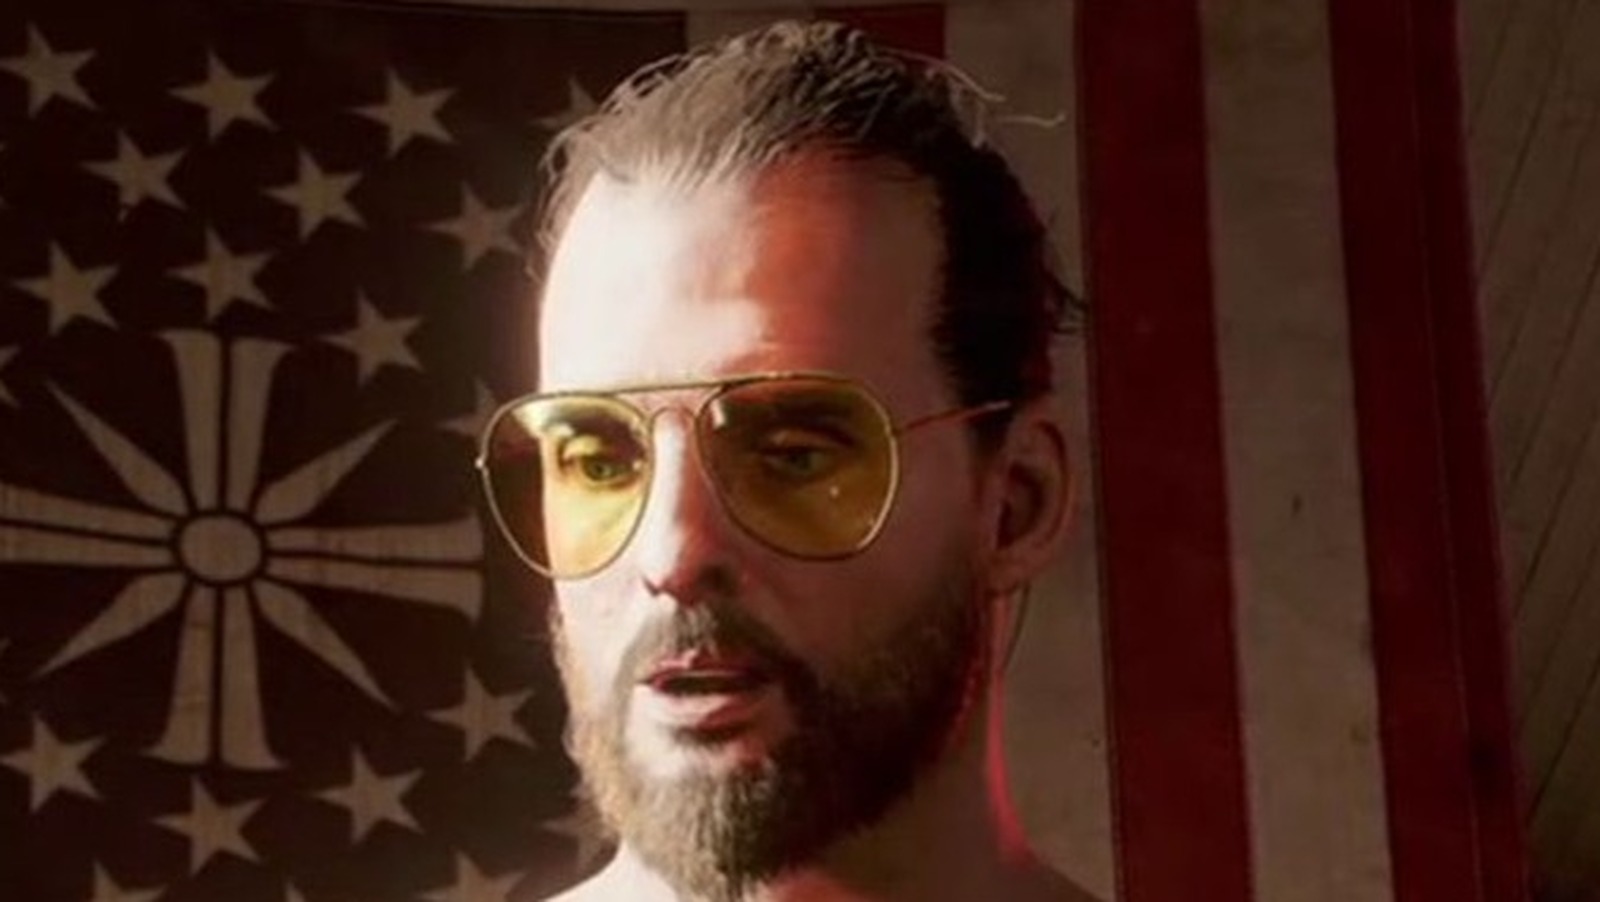 Is Far Cry 5 Cross Platform?  PC, PS4, And Xbox One - Game Specifications